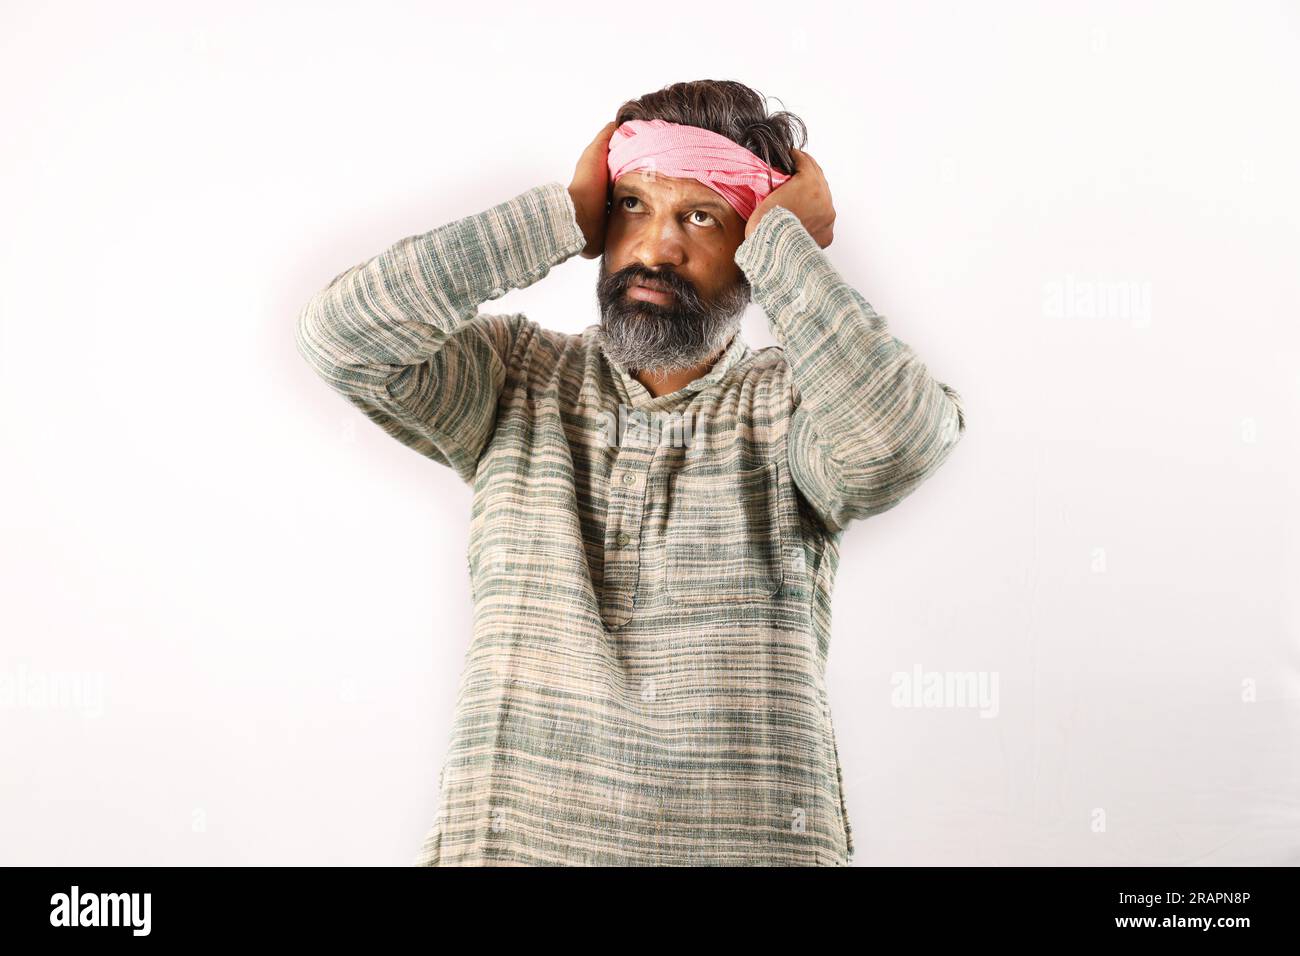 Portrait of Indian bearded man in rural India concept. Funky expressions white background. poor villager man. various expressions and moods of poverty Stock Photo